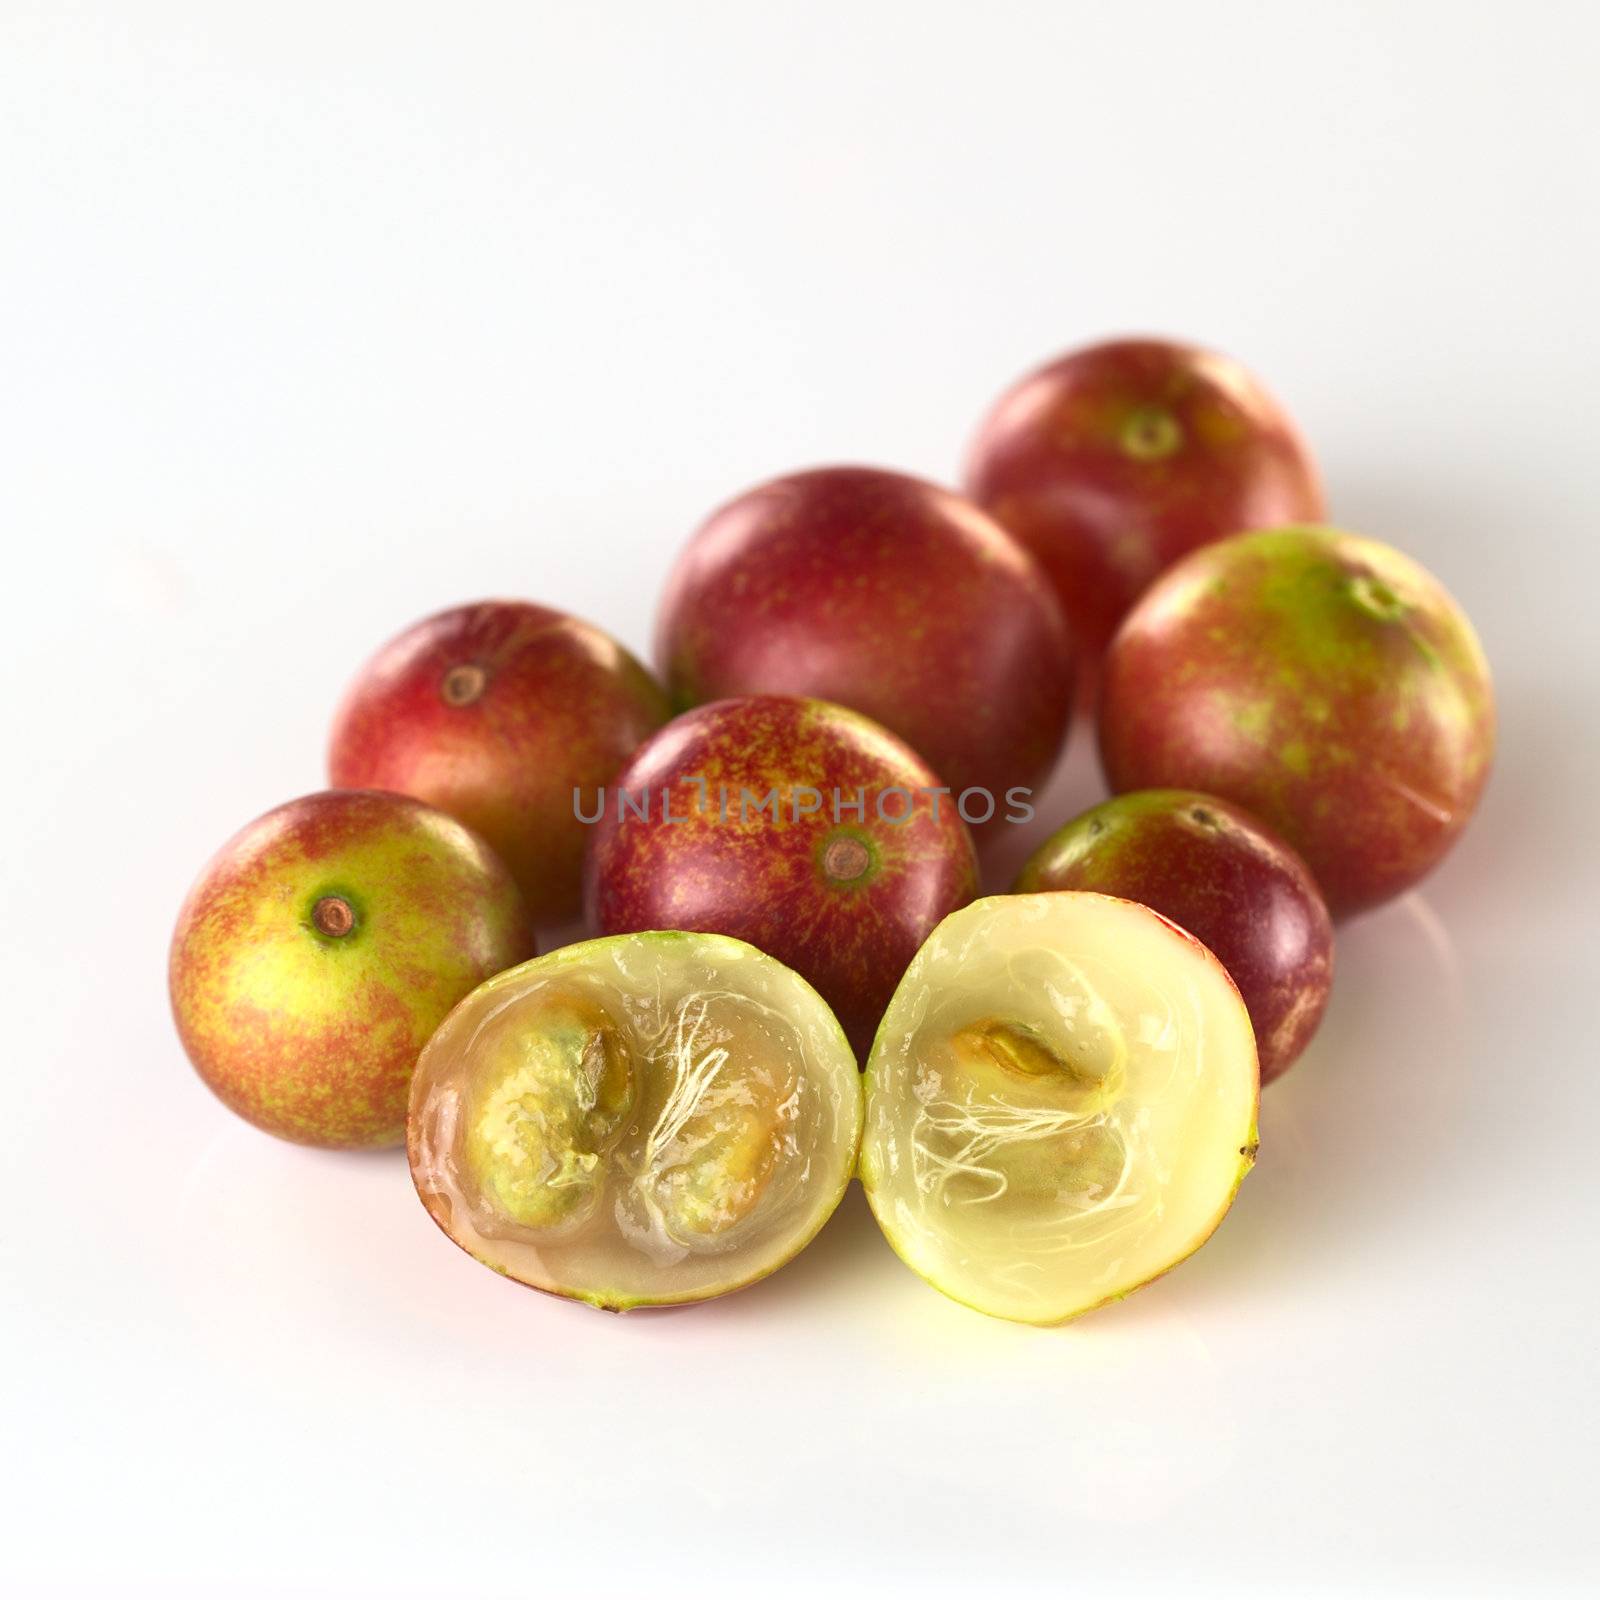 Camu camu berry fruits (lat. Myrciaria dubia) which are grown in the Amazon region and have a very high Vitamin C content (Selective Focus, Focus on the camu camu halves in the front)